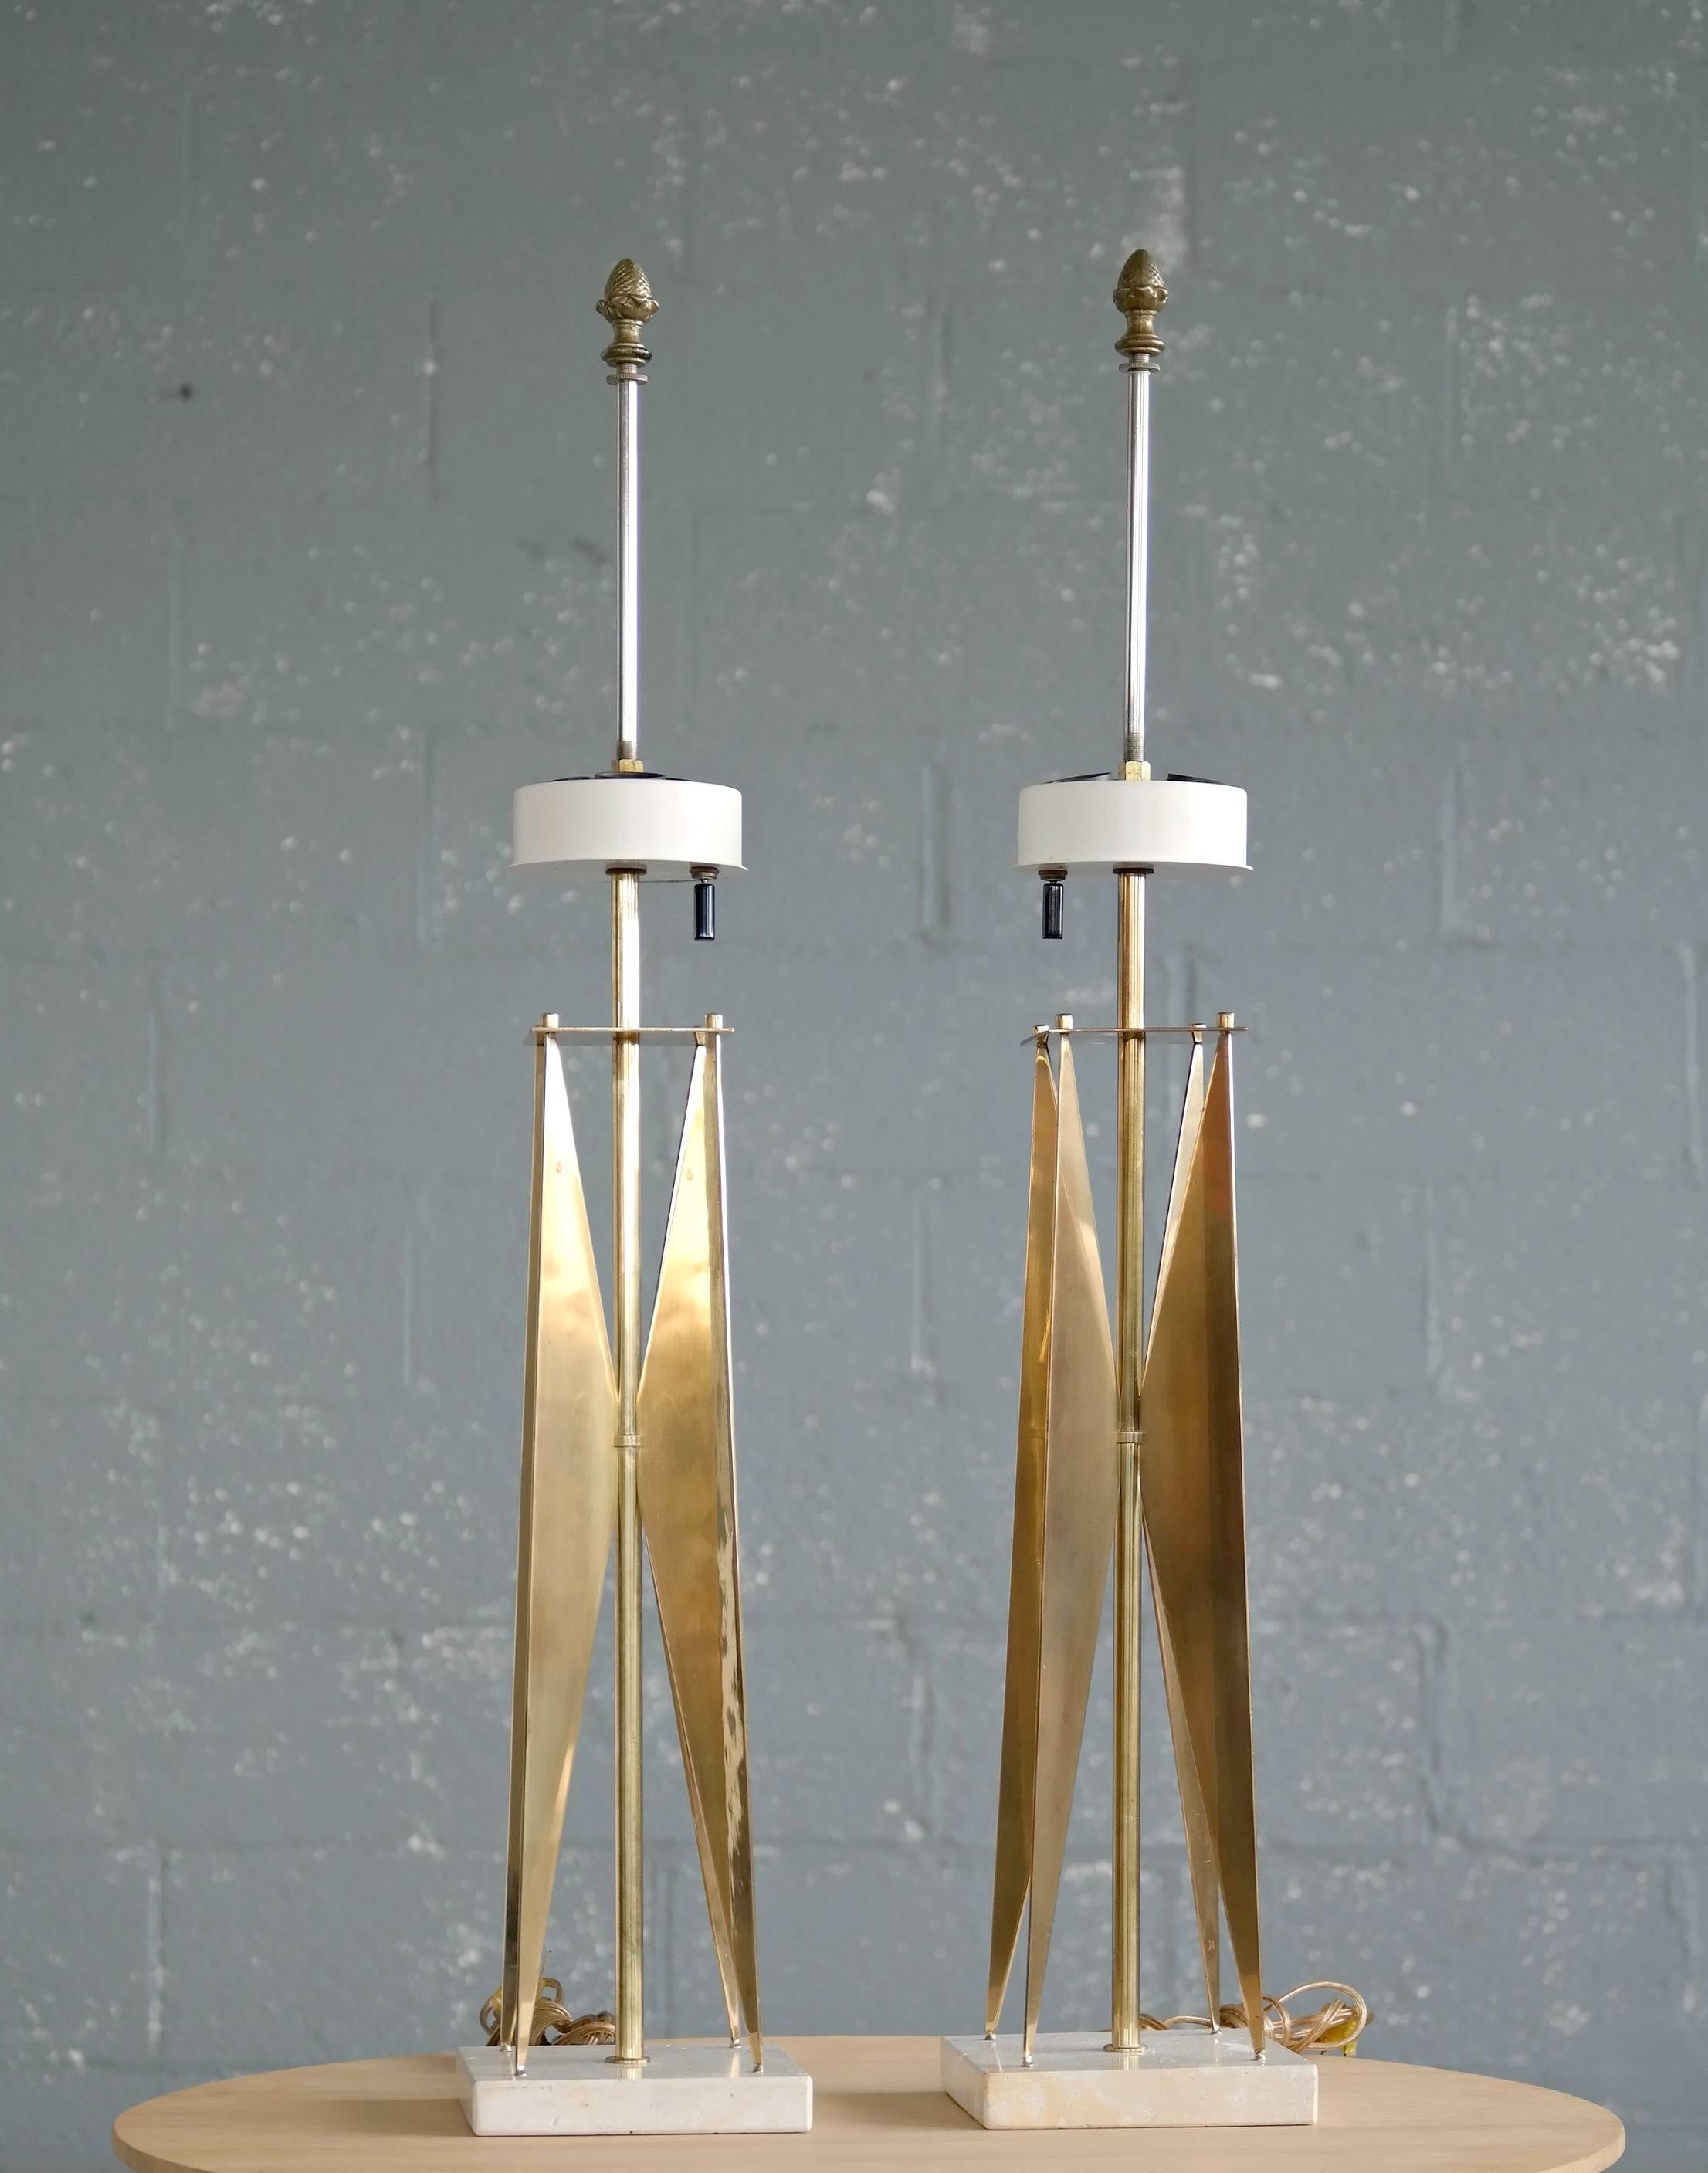 A rare pair of sculptural table lamps in hand polished brass and travertine designed by Gerald Thurston for Lightolier in the 1950s. Probably some of the most elegant and impressive lamps to come out of the era and Thurston underscoring why